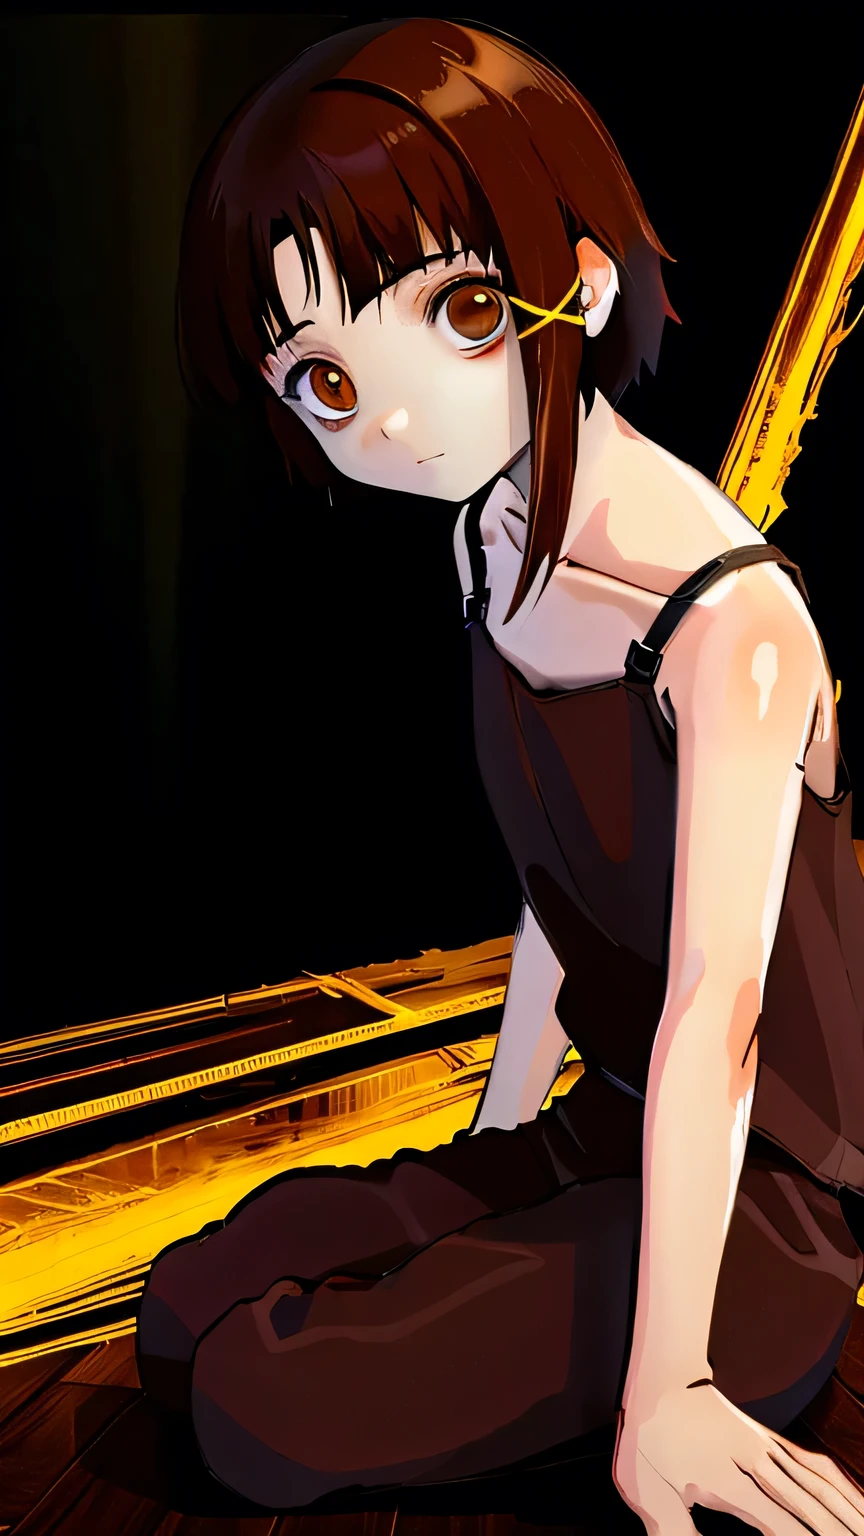 solo,1female\(iwakura lain\(Serial Experiments Lain\),no expression face,age of 12,(big eyes:1.2),brown eyes,eyes without shine,empty eyes,short asymmetry dark brown hair,yellow hairclip,white pale skin,(white long camisole:1.3),(looking at viewer),dynamic pose,sitting\), BREAK ,background\((dark:1.5),messy room,server room,inside\), BREAK ,quality\(8k,wallpaper of extremely detailed CG unit, ​masterpiece,hight resolution,top-quality,top-quality real texture skin,hyper realisitic,increase the resolution,RAW photos,best qualtiy,highly detailed,the wallpaper,cinematic lighting,ray trace,golden ratio\),(oil painting),dynamic angle,darkwoods style,